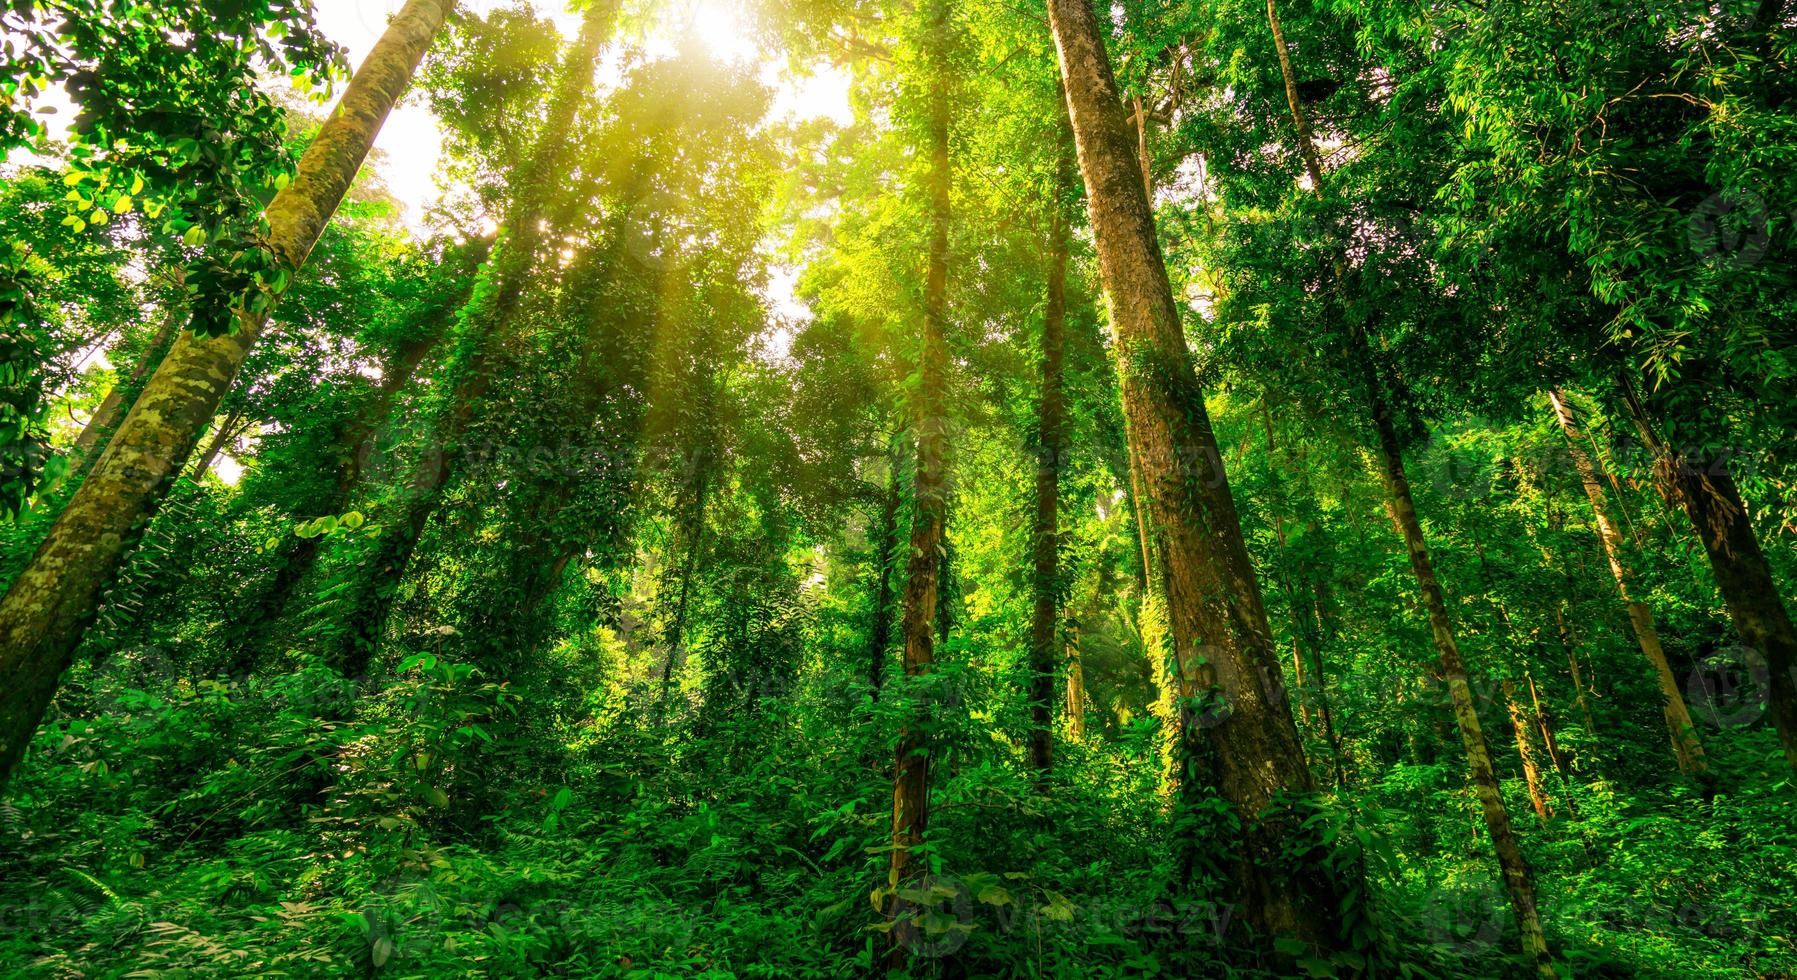 Bottom view of green tree in tropical forest with sunshine. Bottom view background of tree with green leaves and sun light in the the day. Tall tree in woods. Jungle in Thailand. Asian tropical forest photo